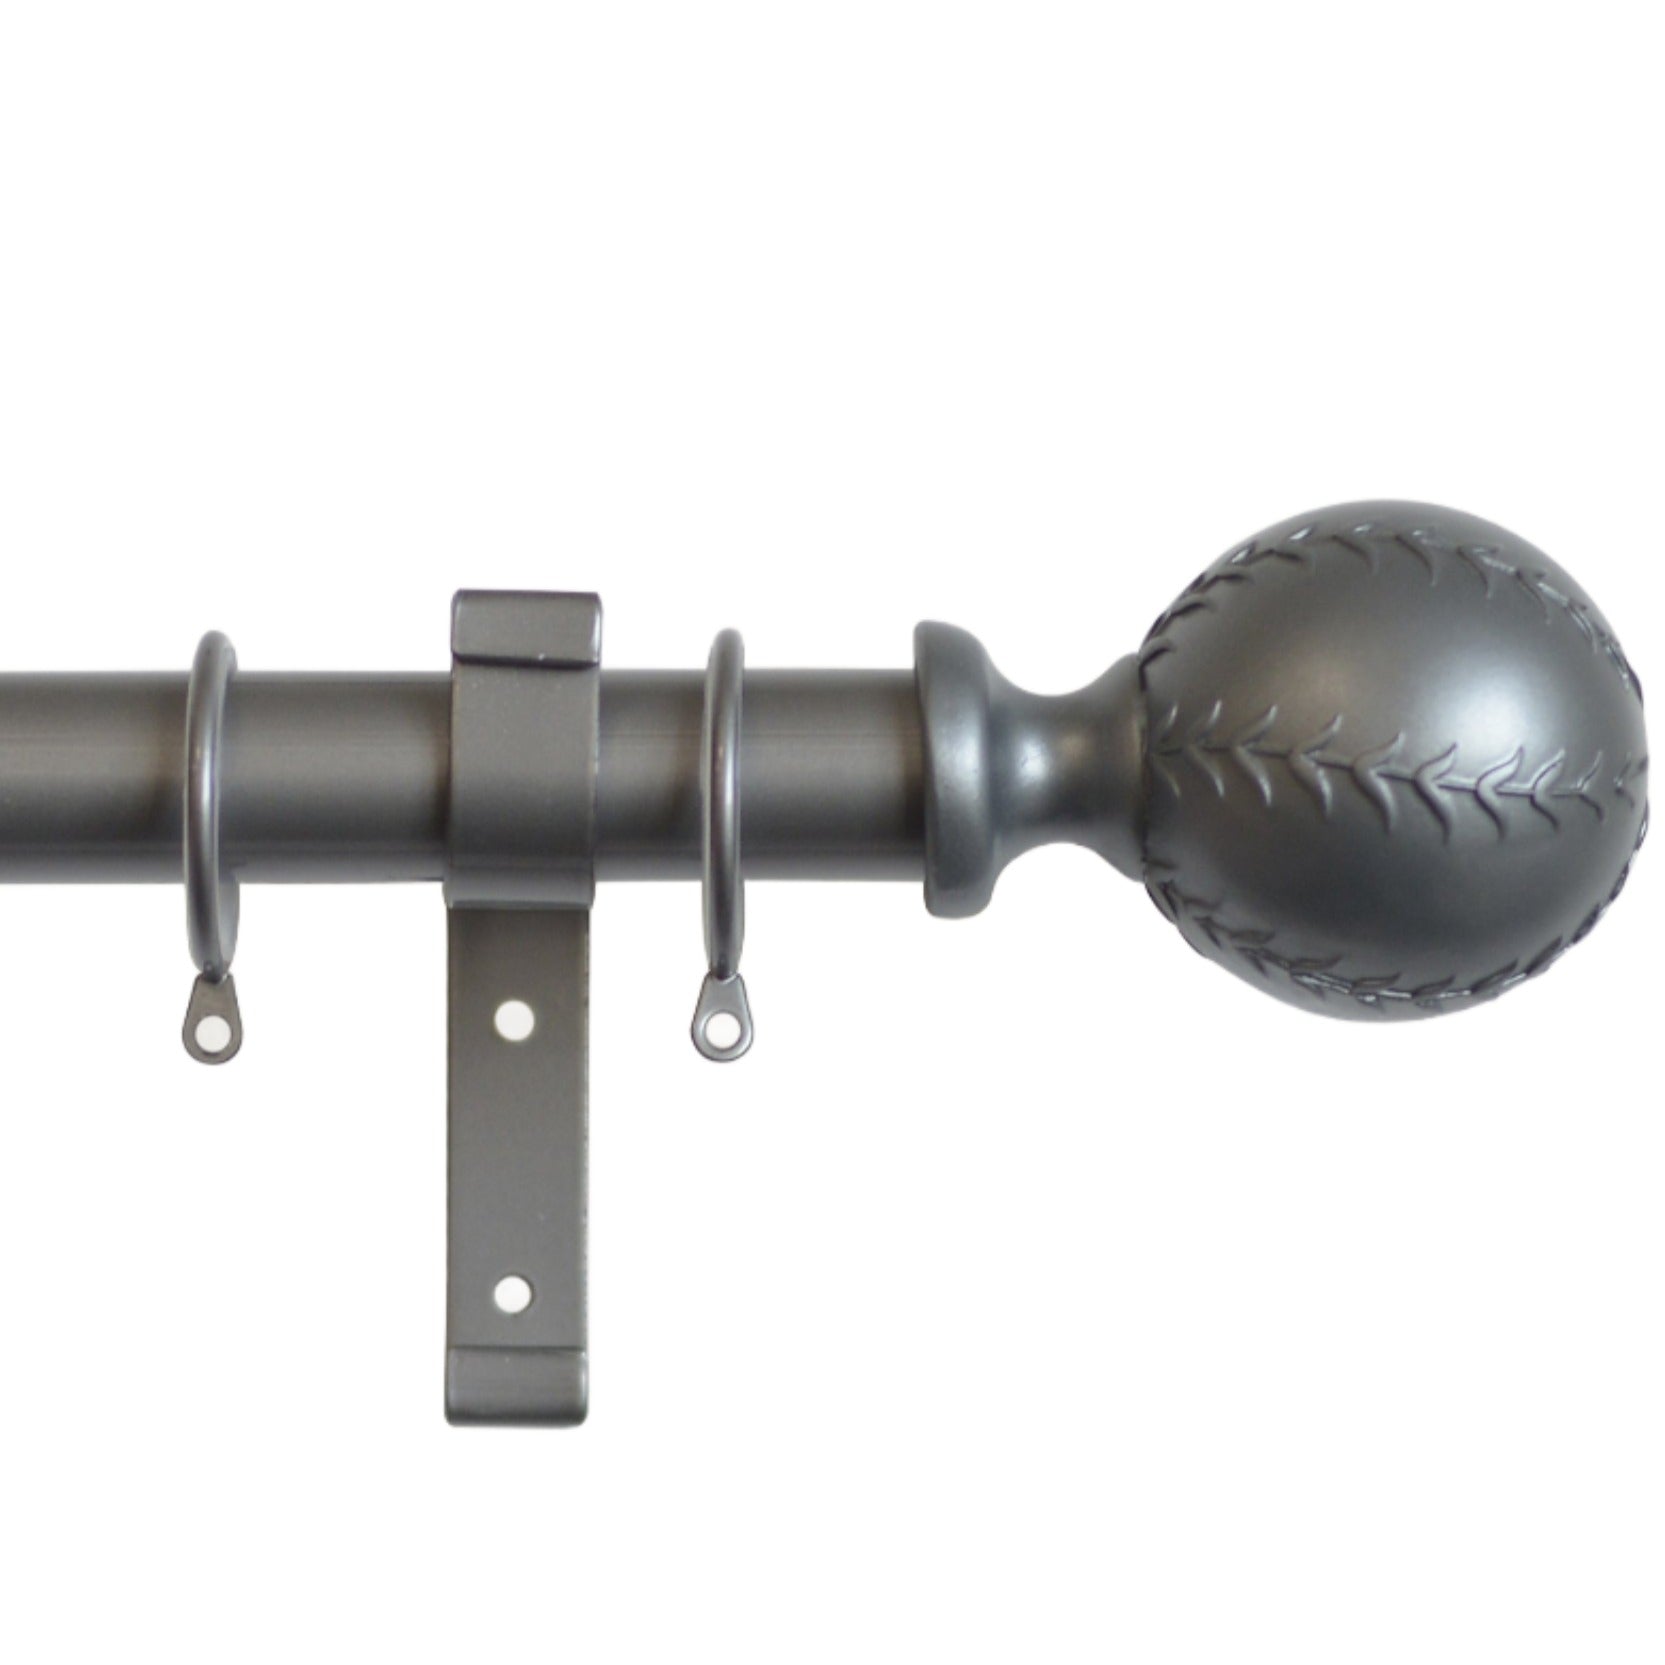 Laura Ashley Swirl Curtain Pole Set in Pale Charcoal